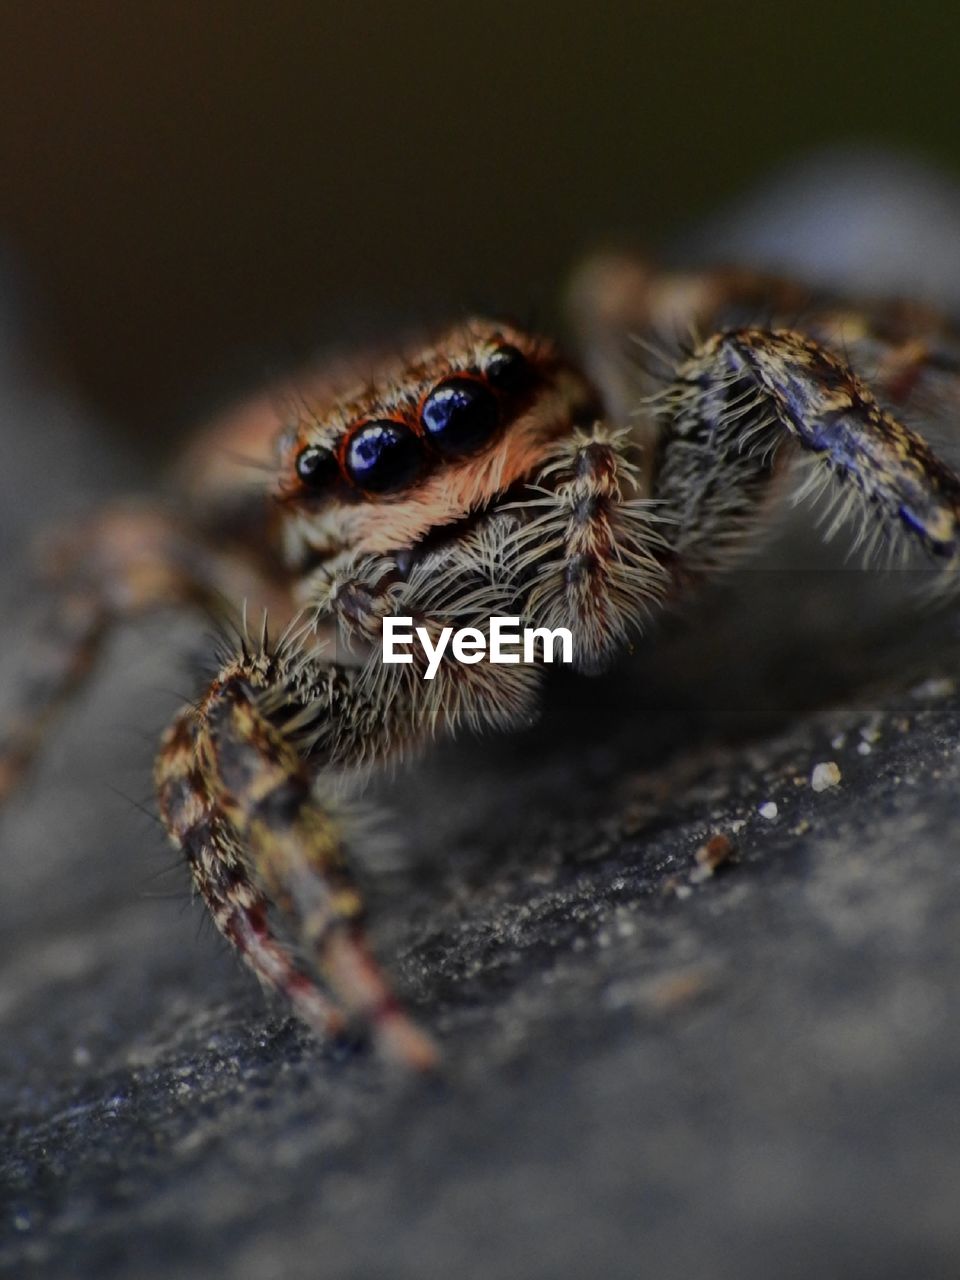 EXTREME CLOSE-UP OF SPIDER